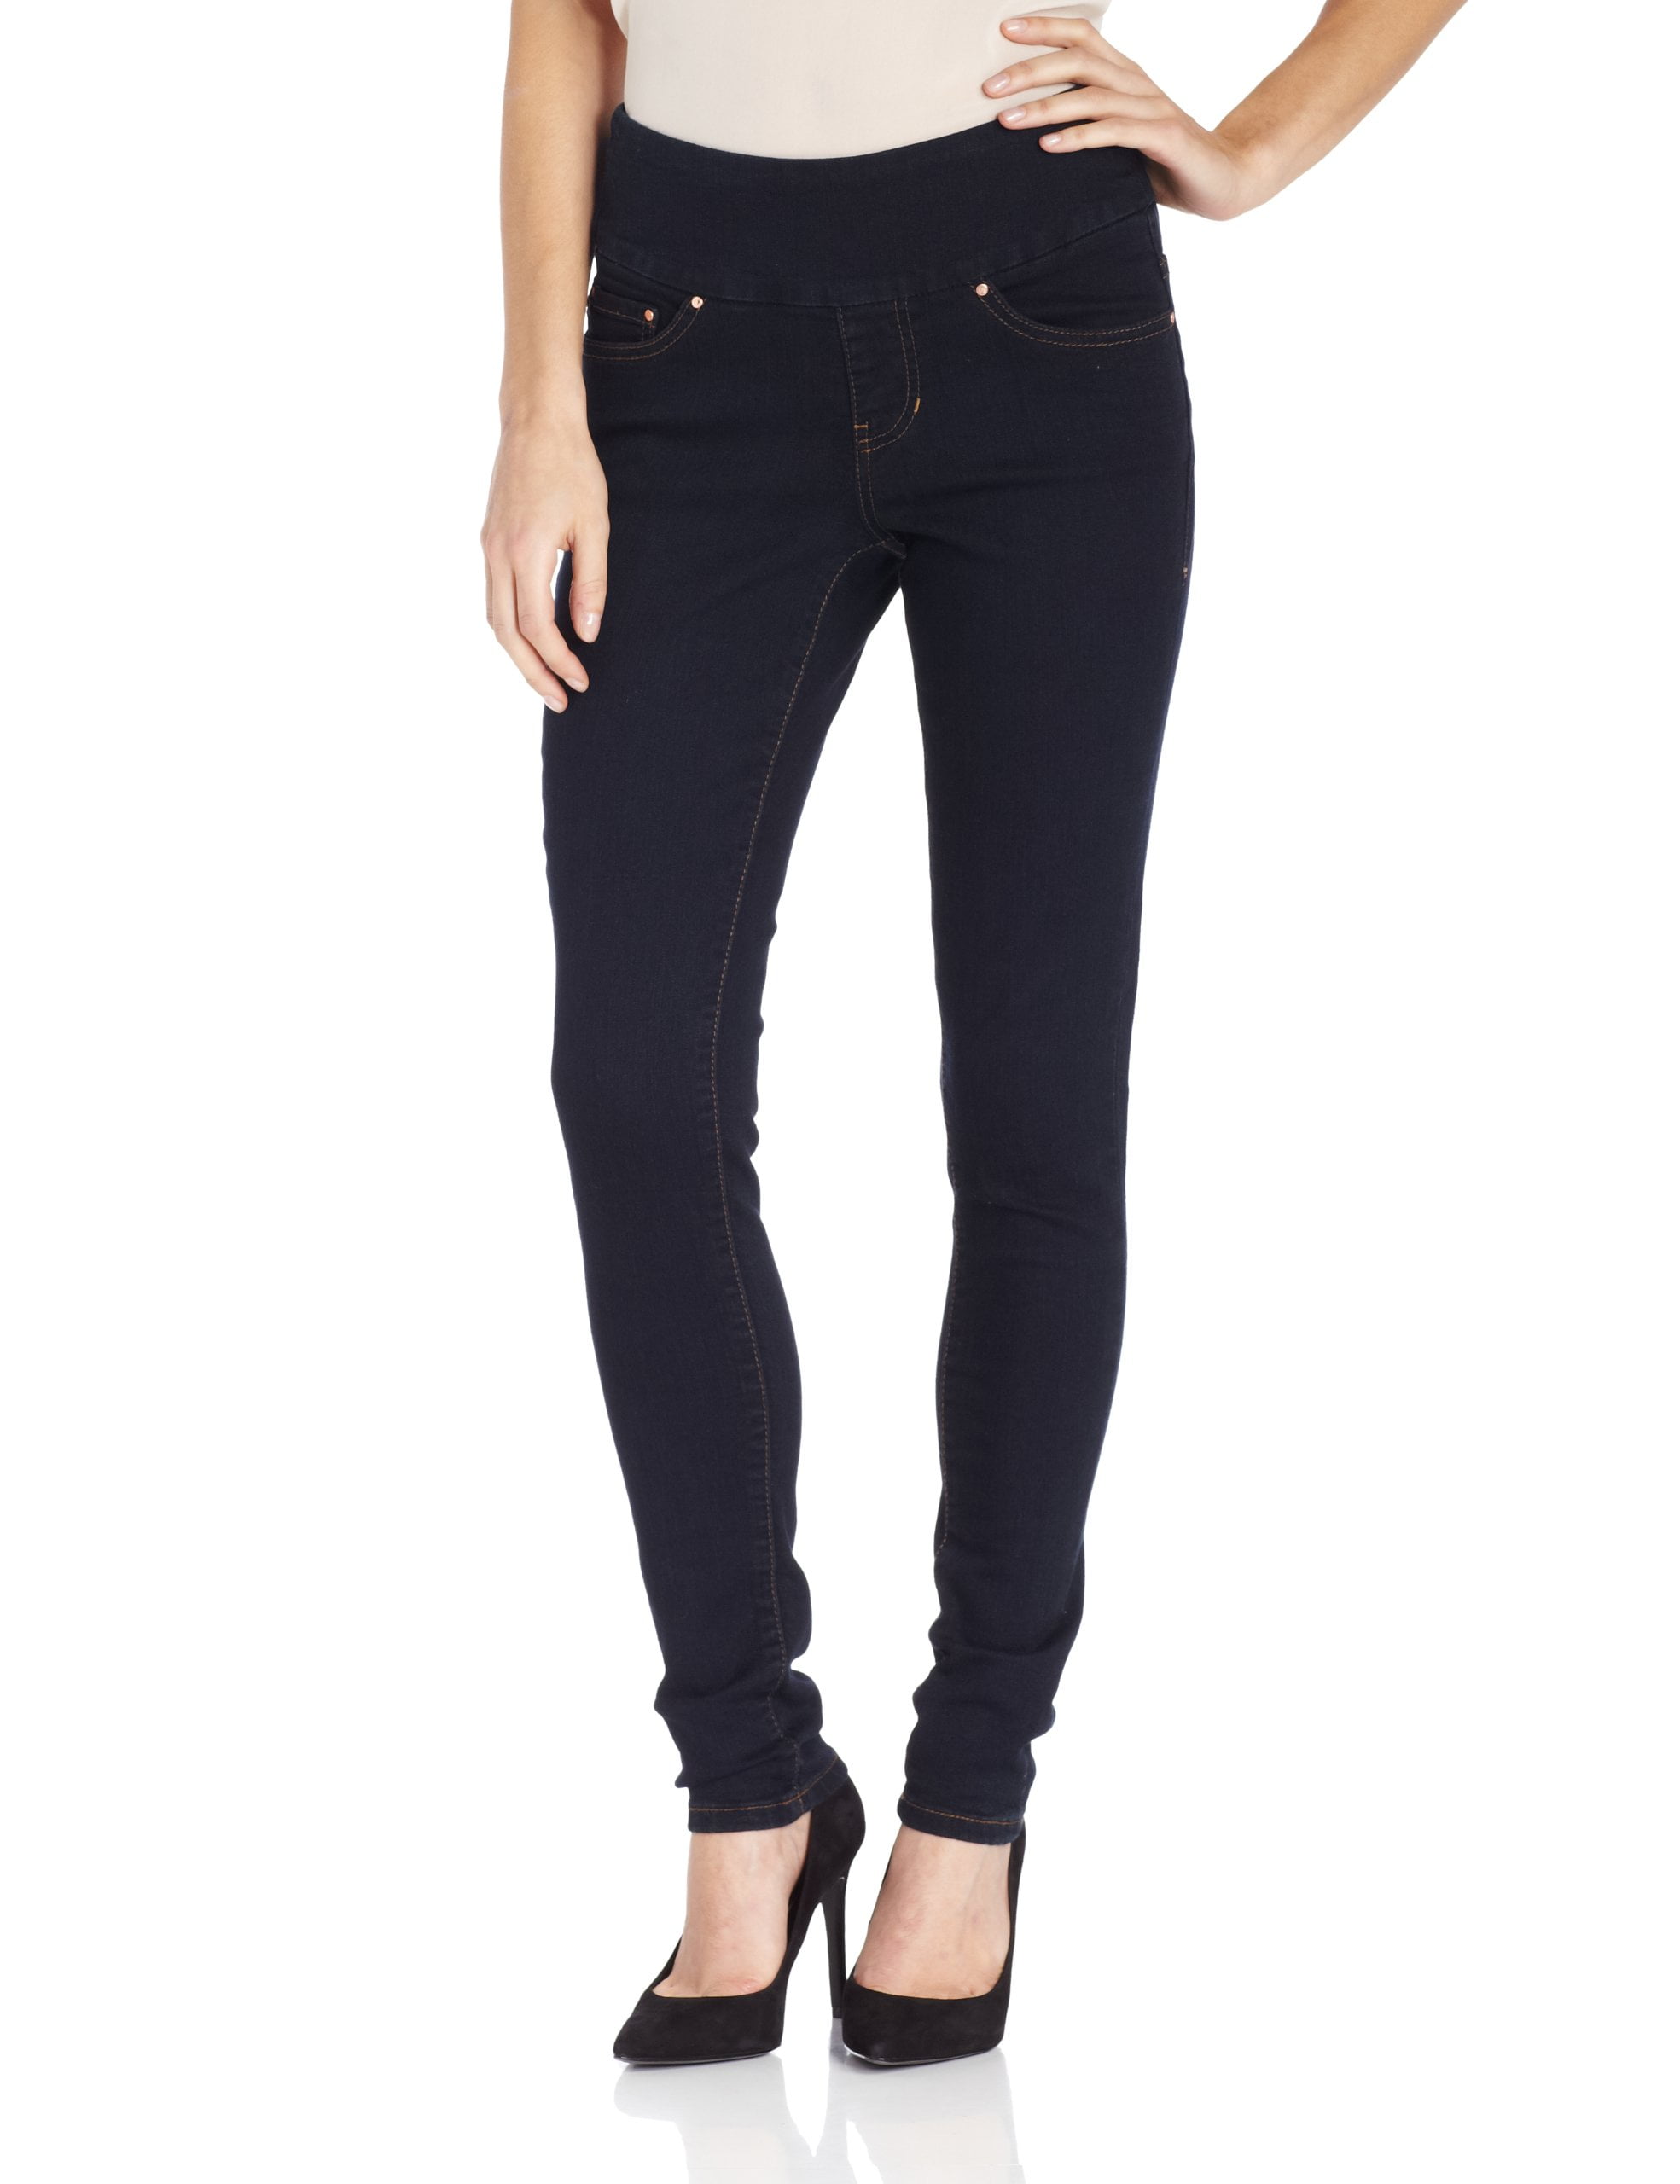 JAG Jeans - Womens Jeans Petite Pull On Ankle Stretch 10P - Walmart.com ...